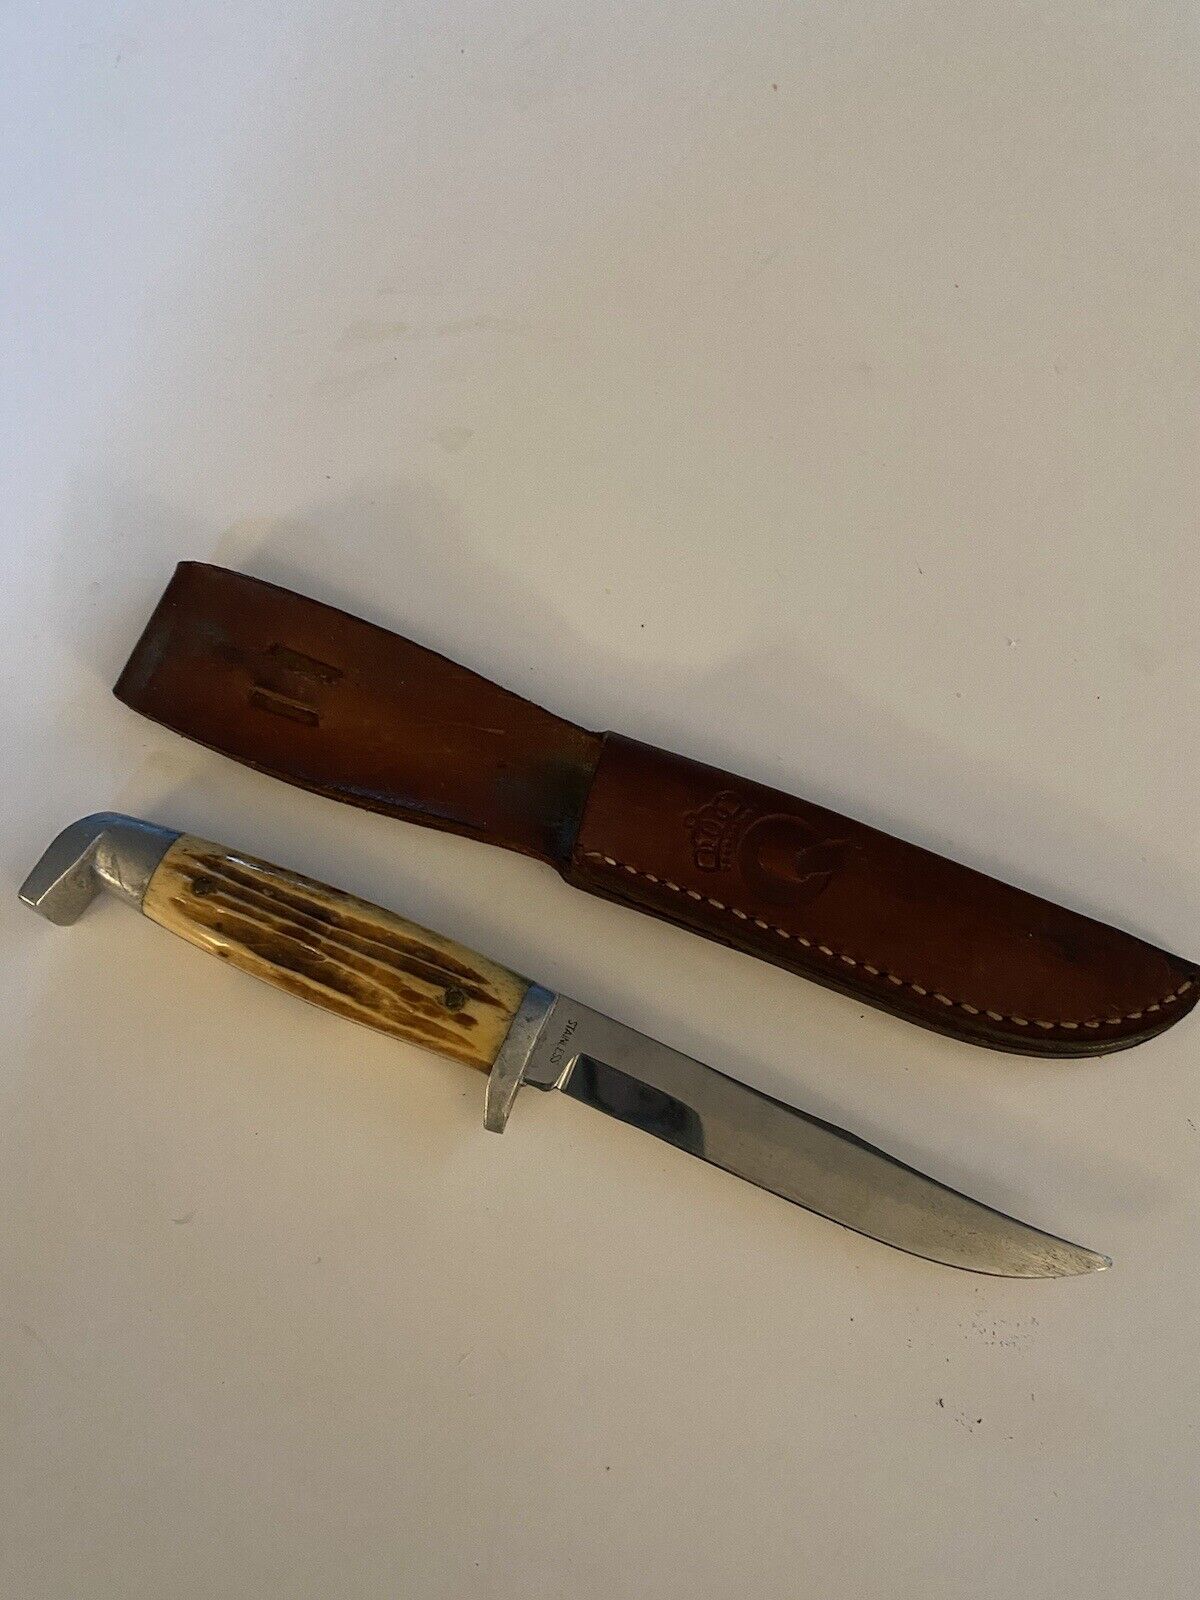 Queen Cutlery Vintage Hunting Knife Stainless Steel Blade 8”total Length And Sea